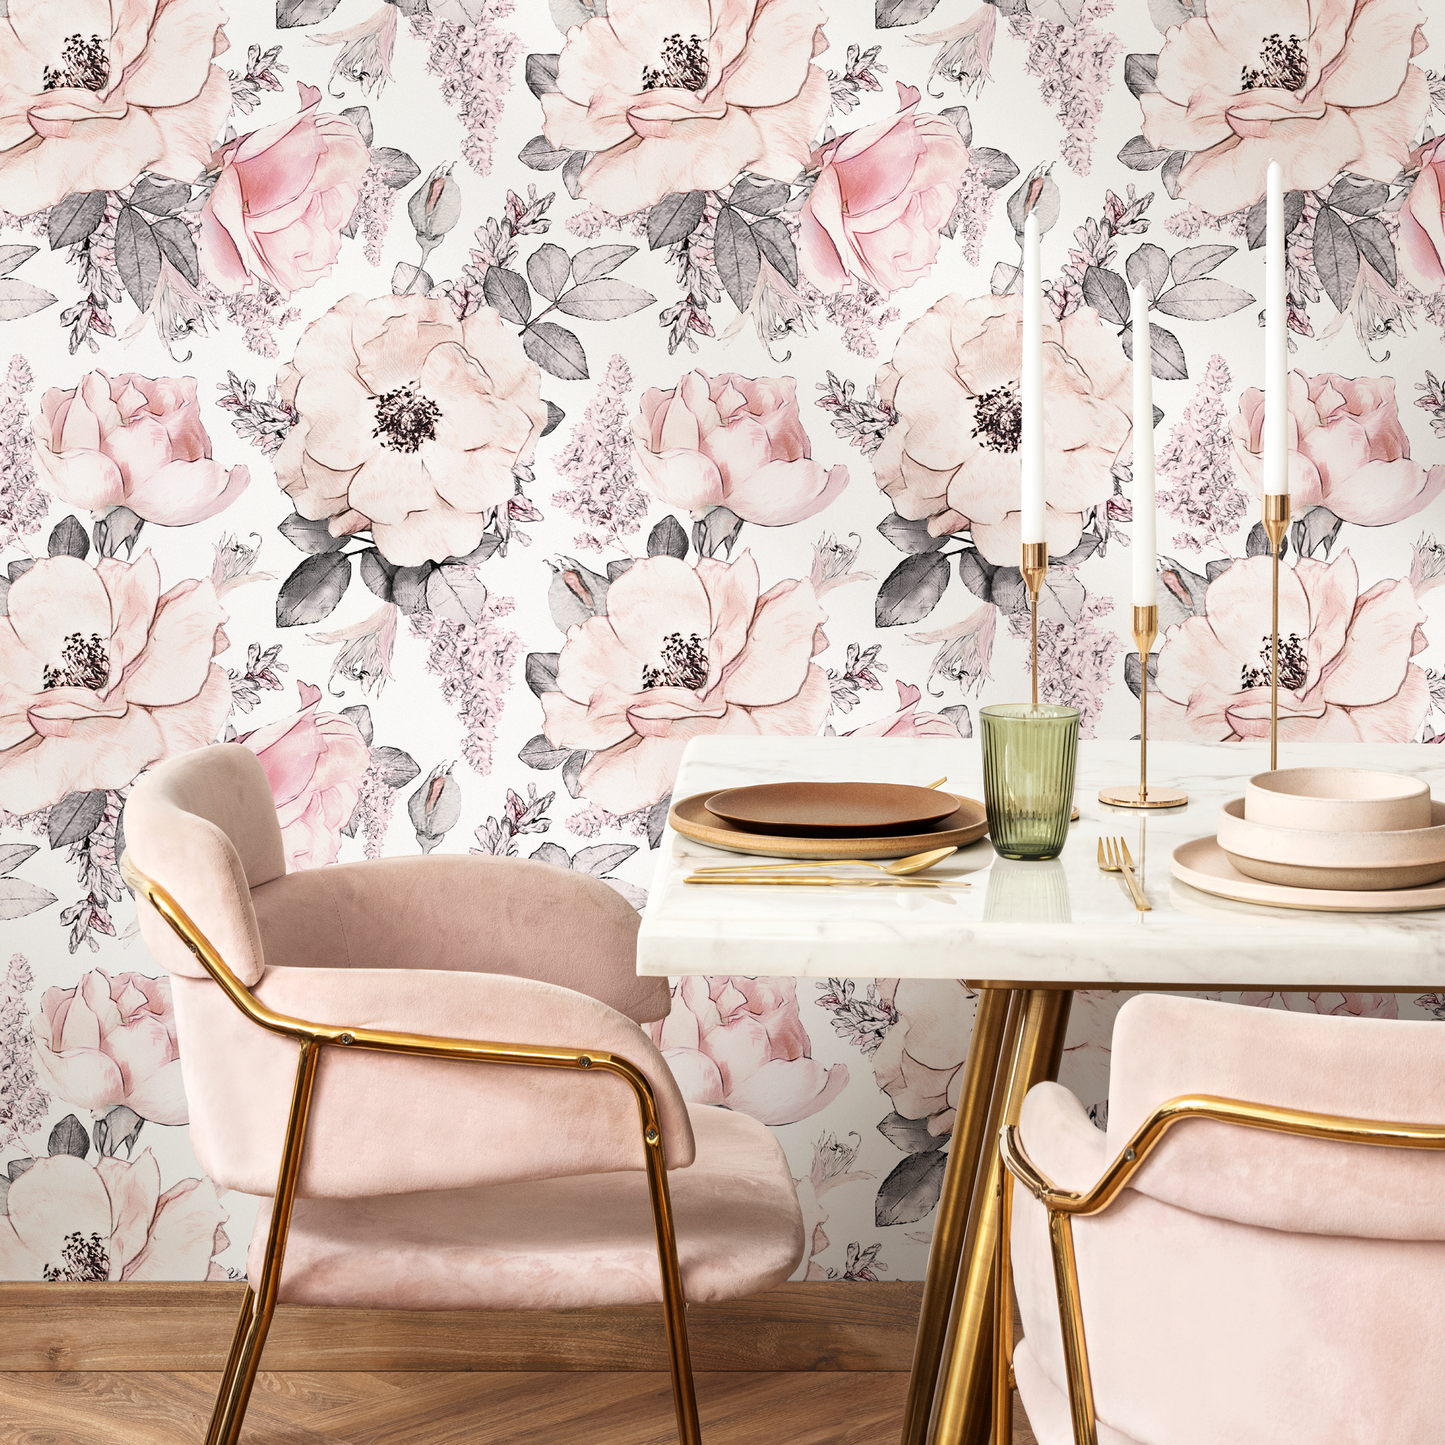 Wallpaper Peel and Stick Wallpaper Removable Wallpaper Home Decor Wall Art Wall Decor Room Decor / Pink Vintage Floral Wallpaper - A068